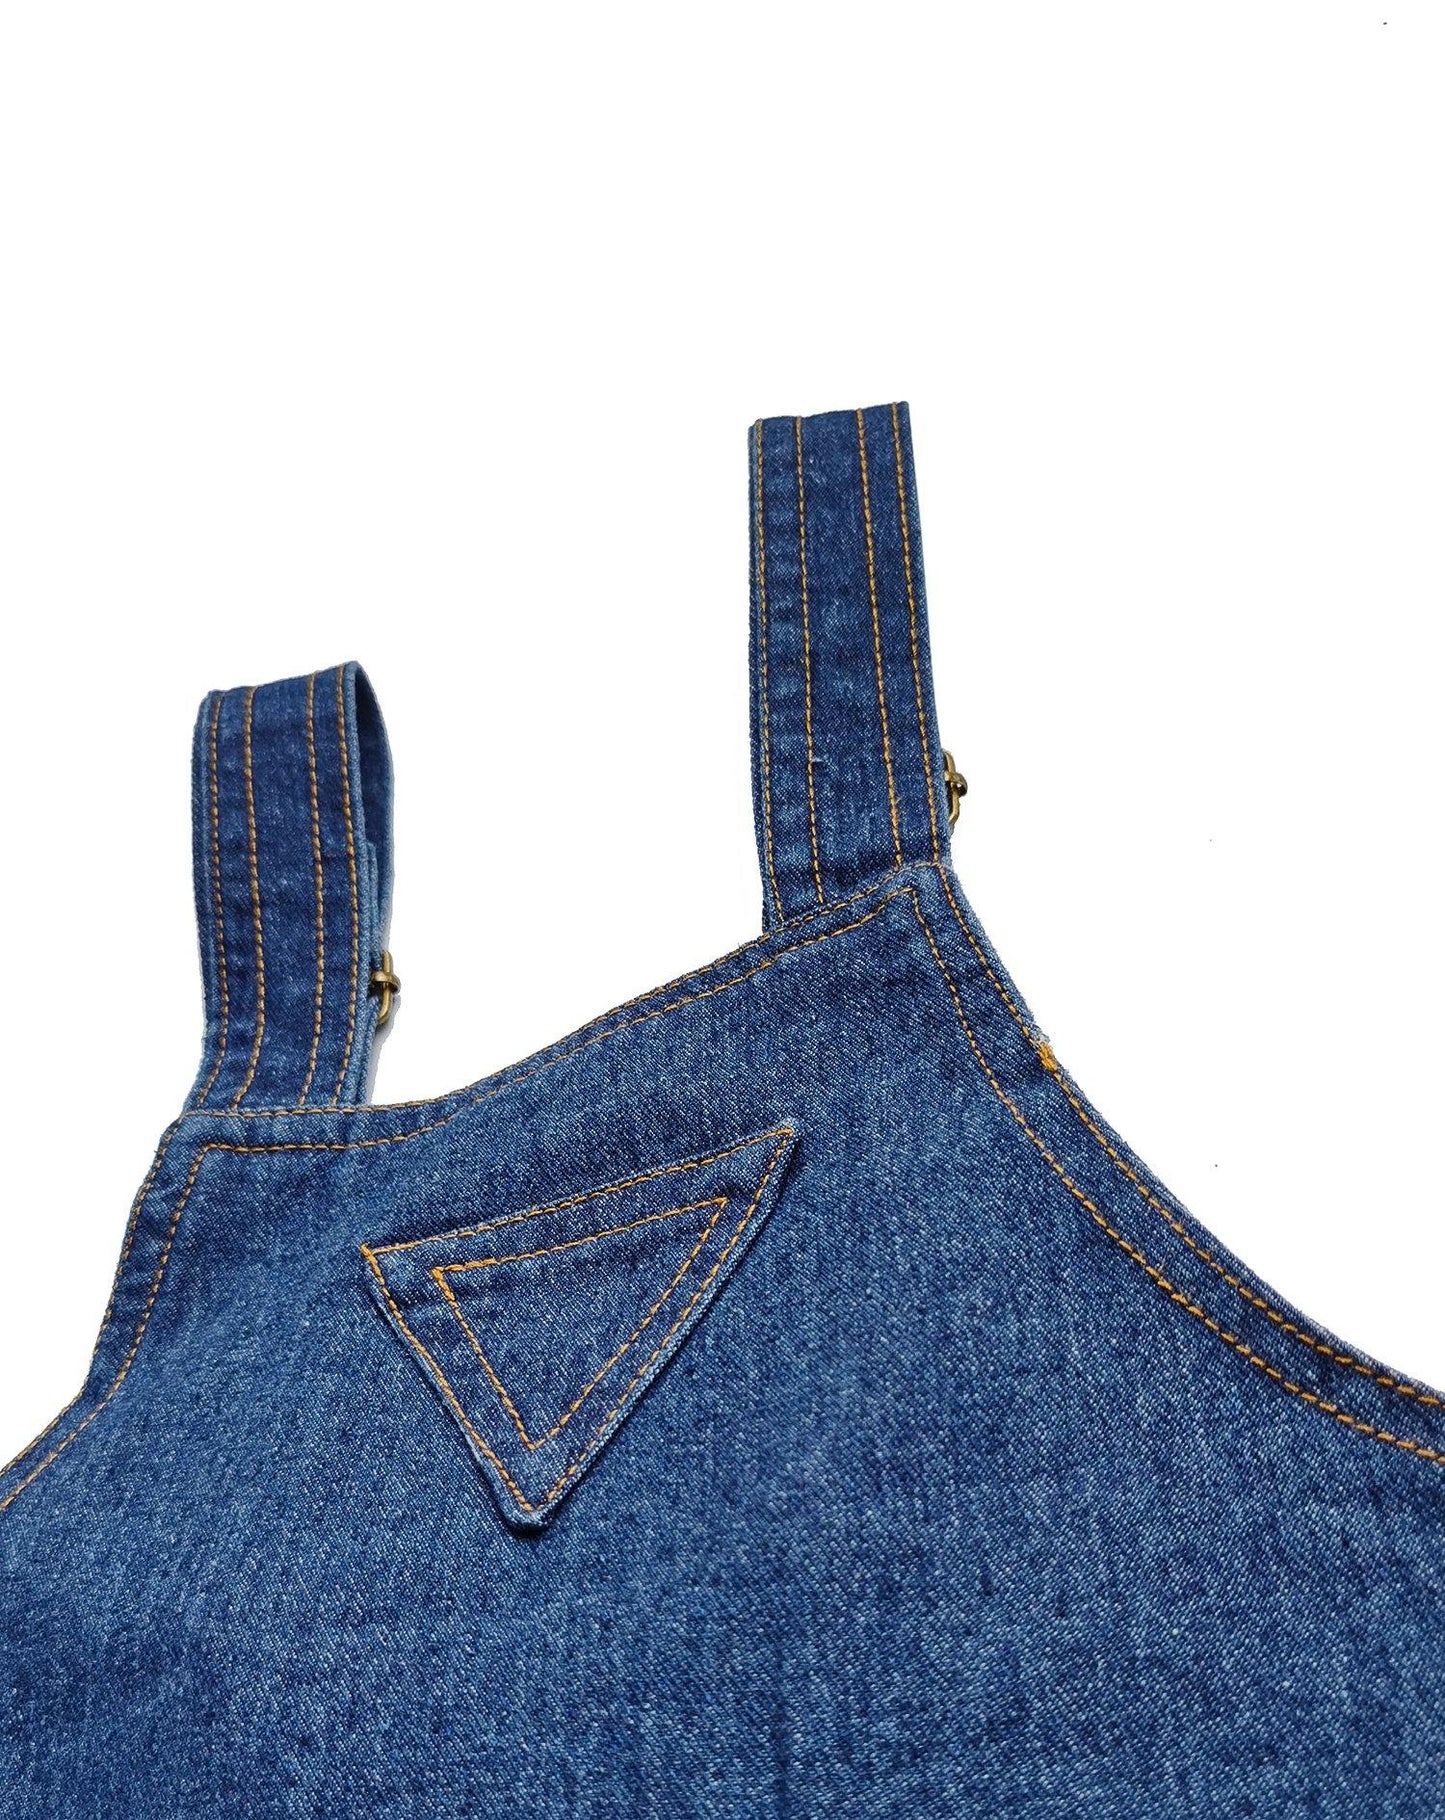 Kidscool Space Baby and Little Snap Leg/Crotch Mettal Buttons Reipped Denim Overalls - Kidscool Space